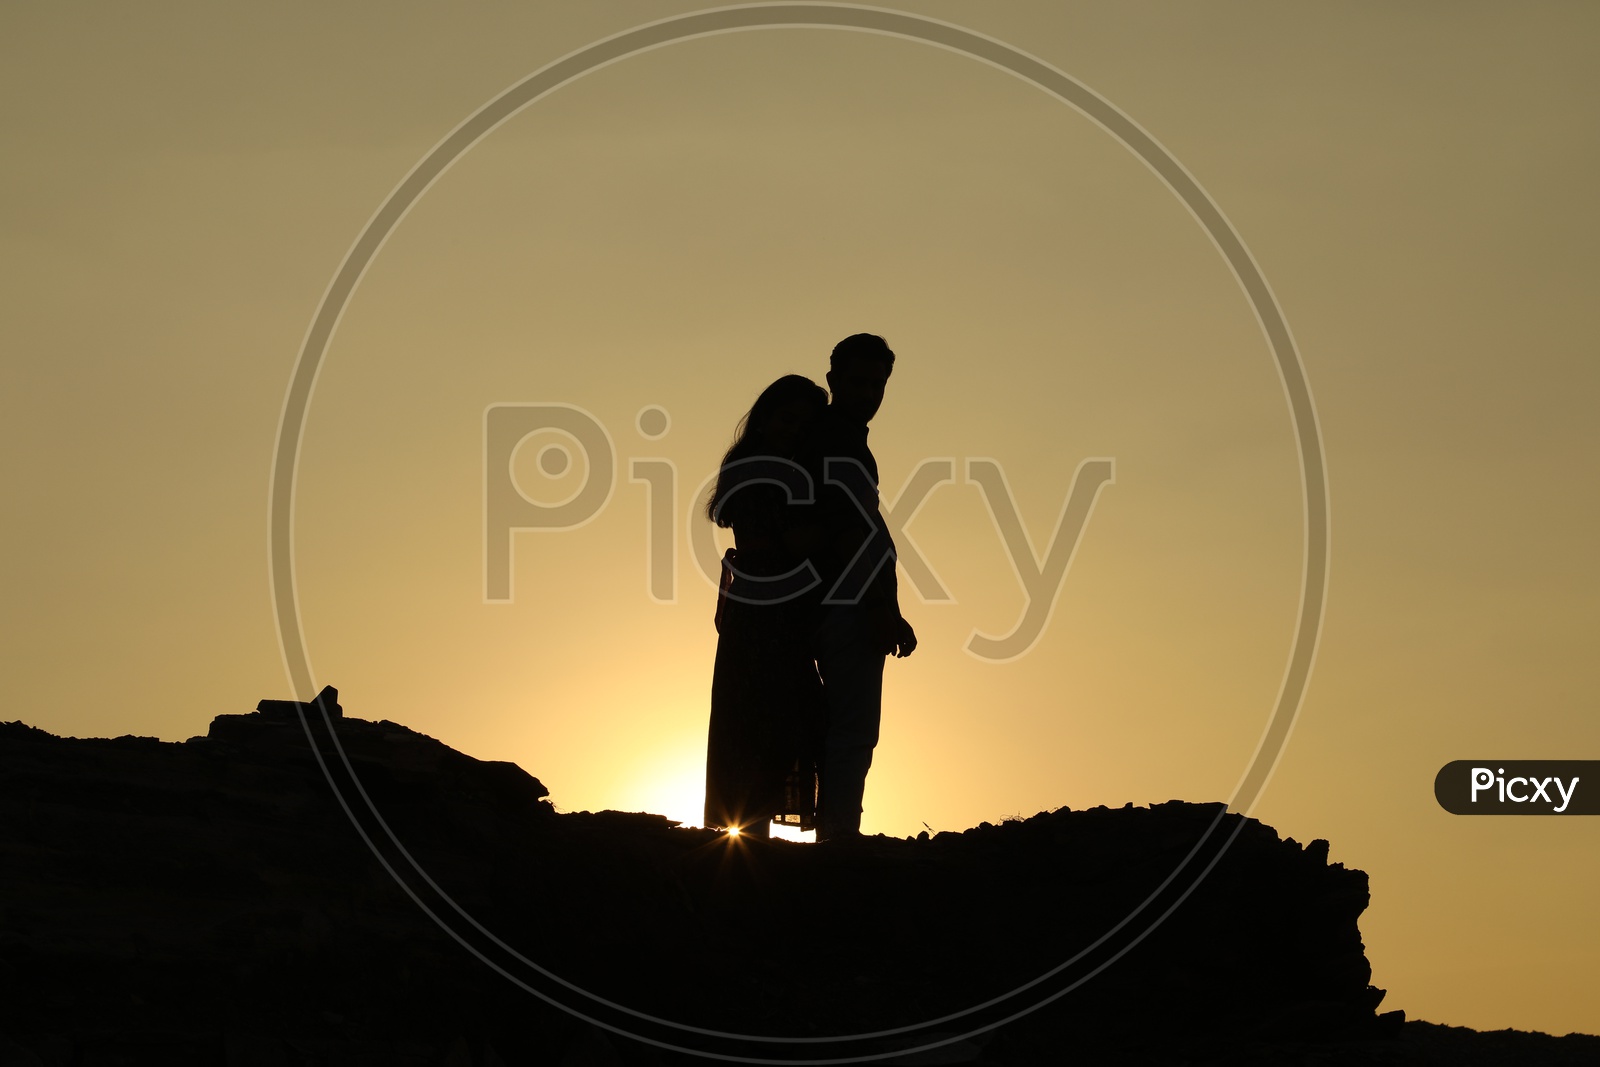 Silhouette of a woman hugging a man from behind on the top of the rocky hill